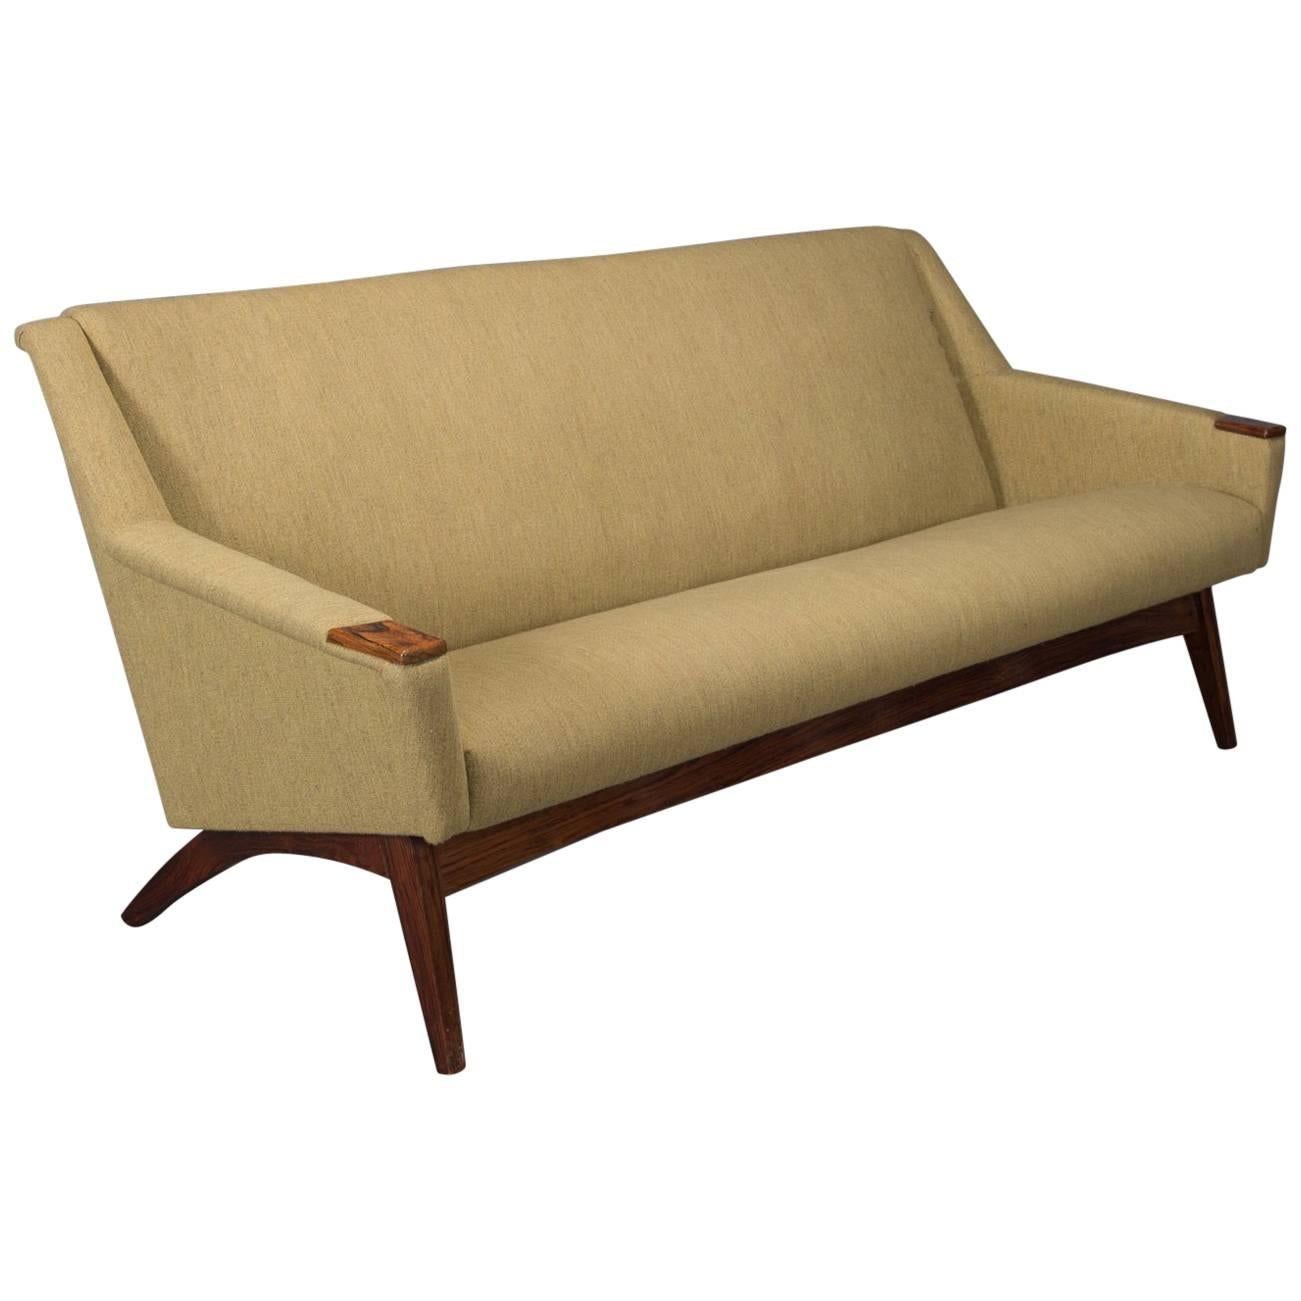 Danish Modern Sofa with Rosewood Paws and Angled Legs